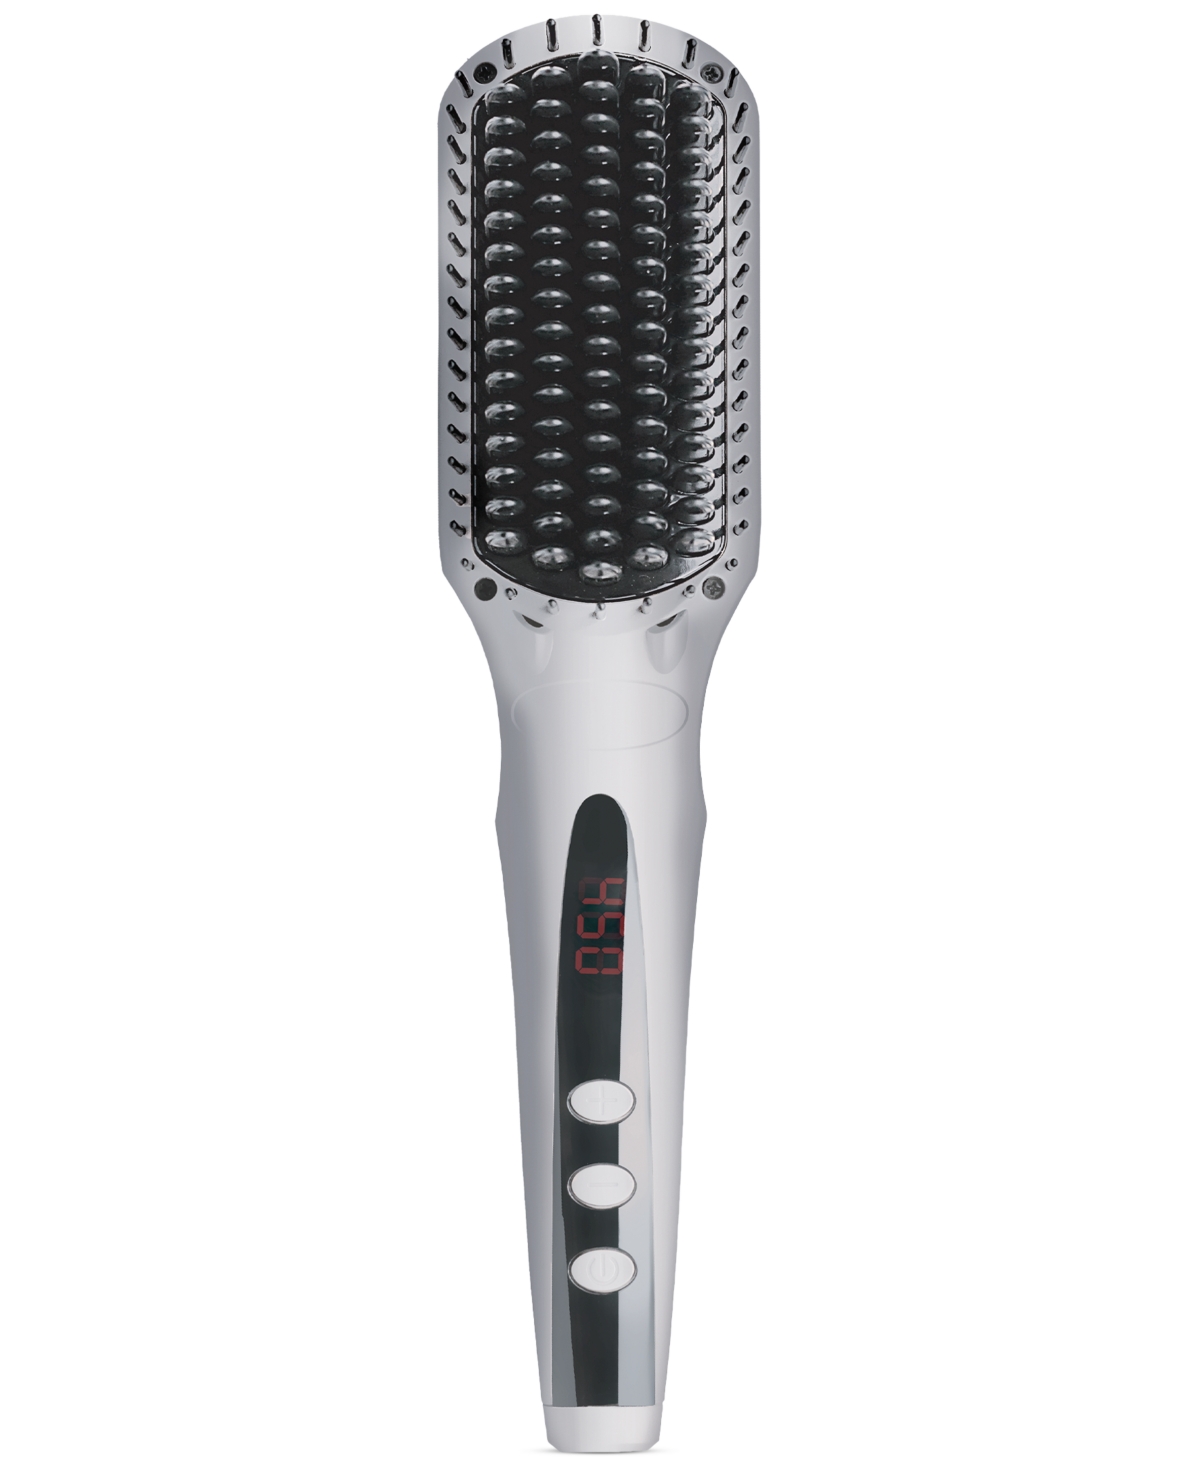 Limited-Edition Heated Straightening Brush, Created for Macy's - Silver (Heat Brush)